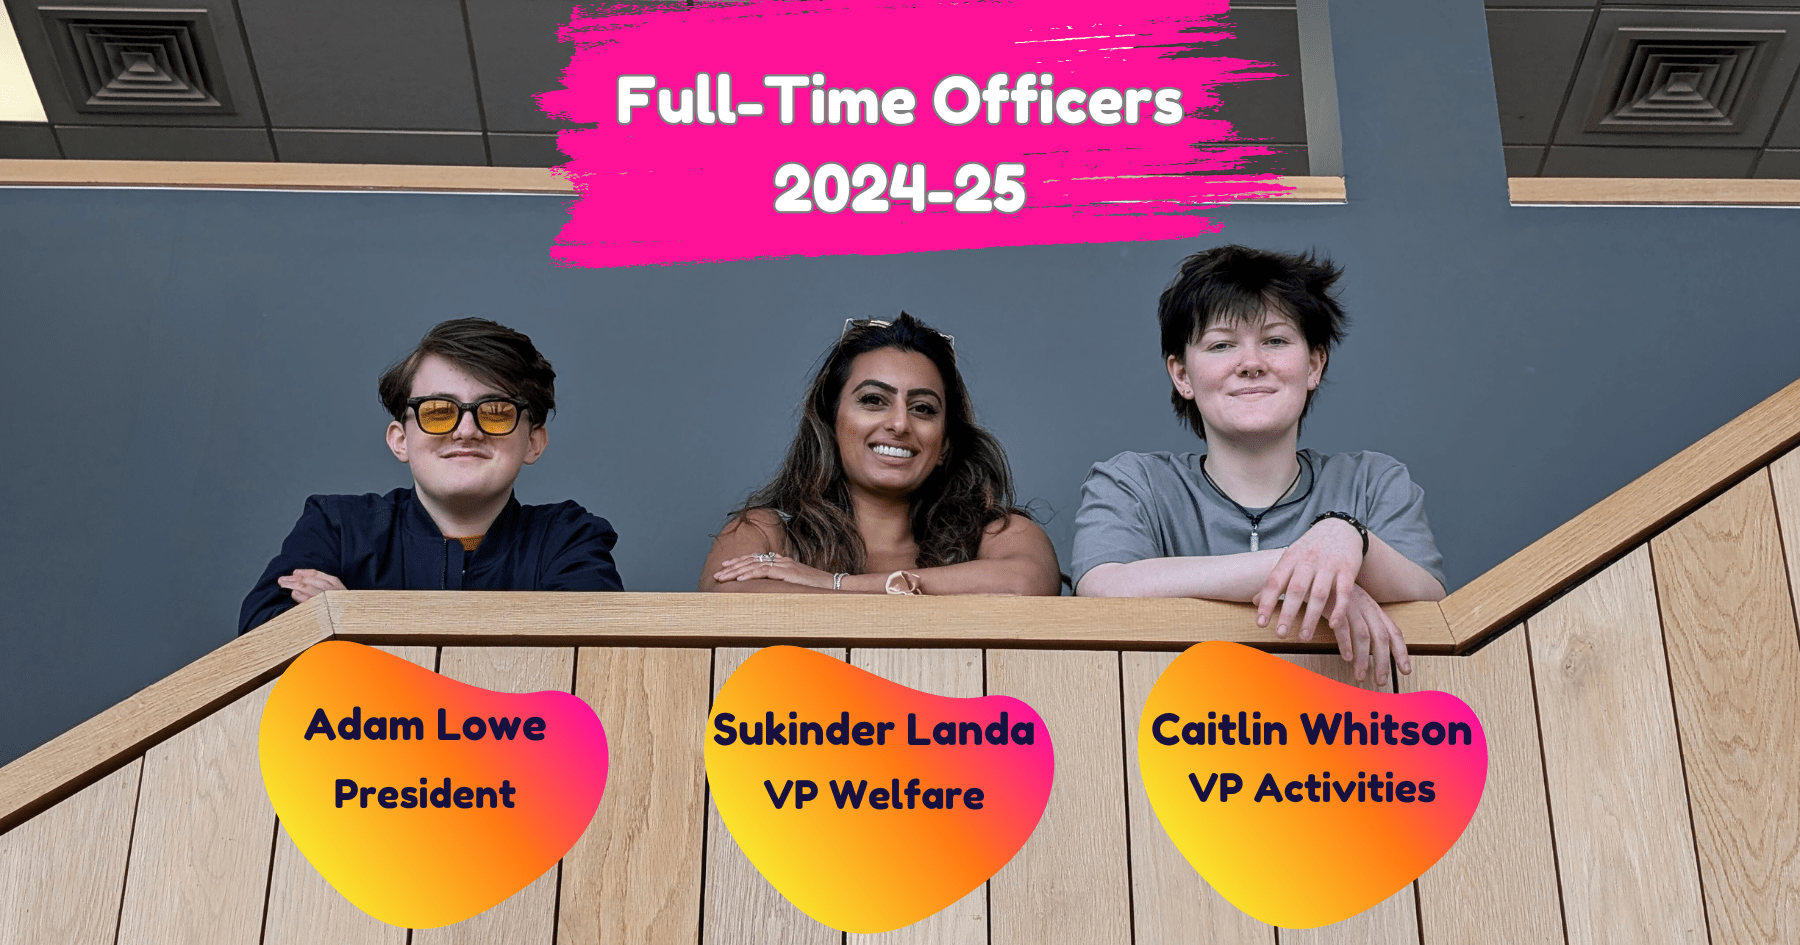 Full-Time Officers 2024-25